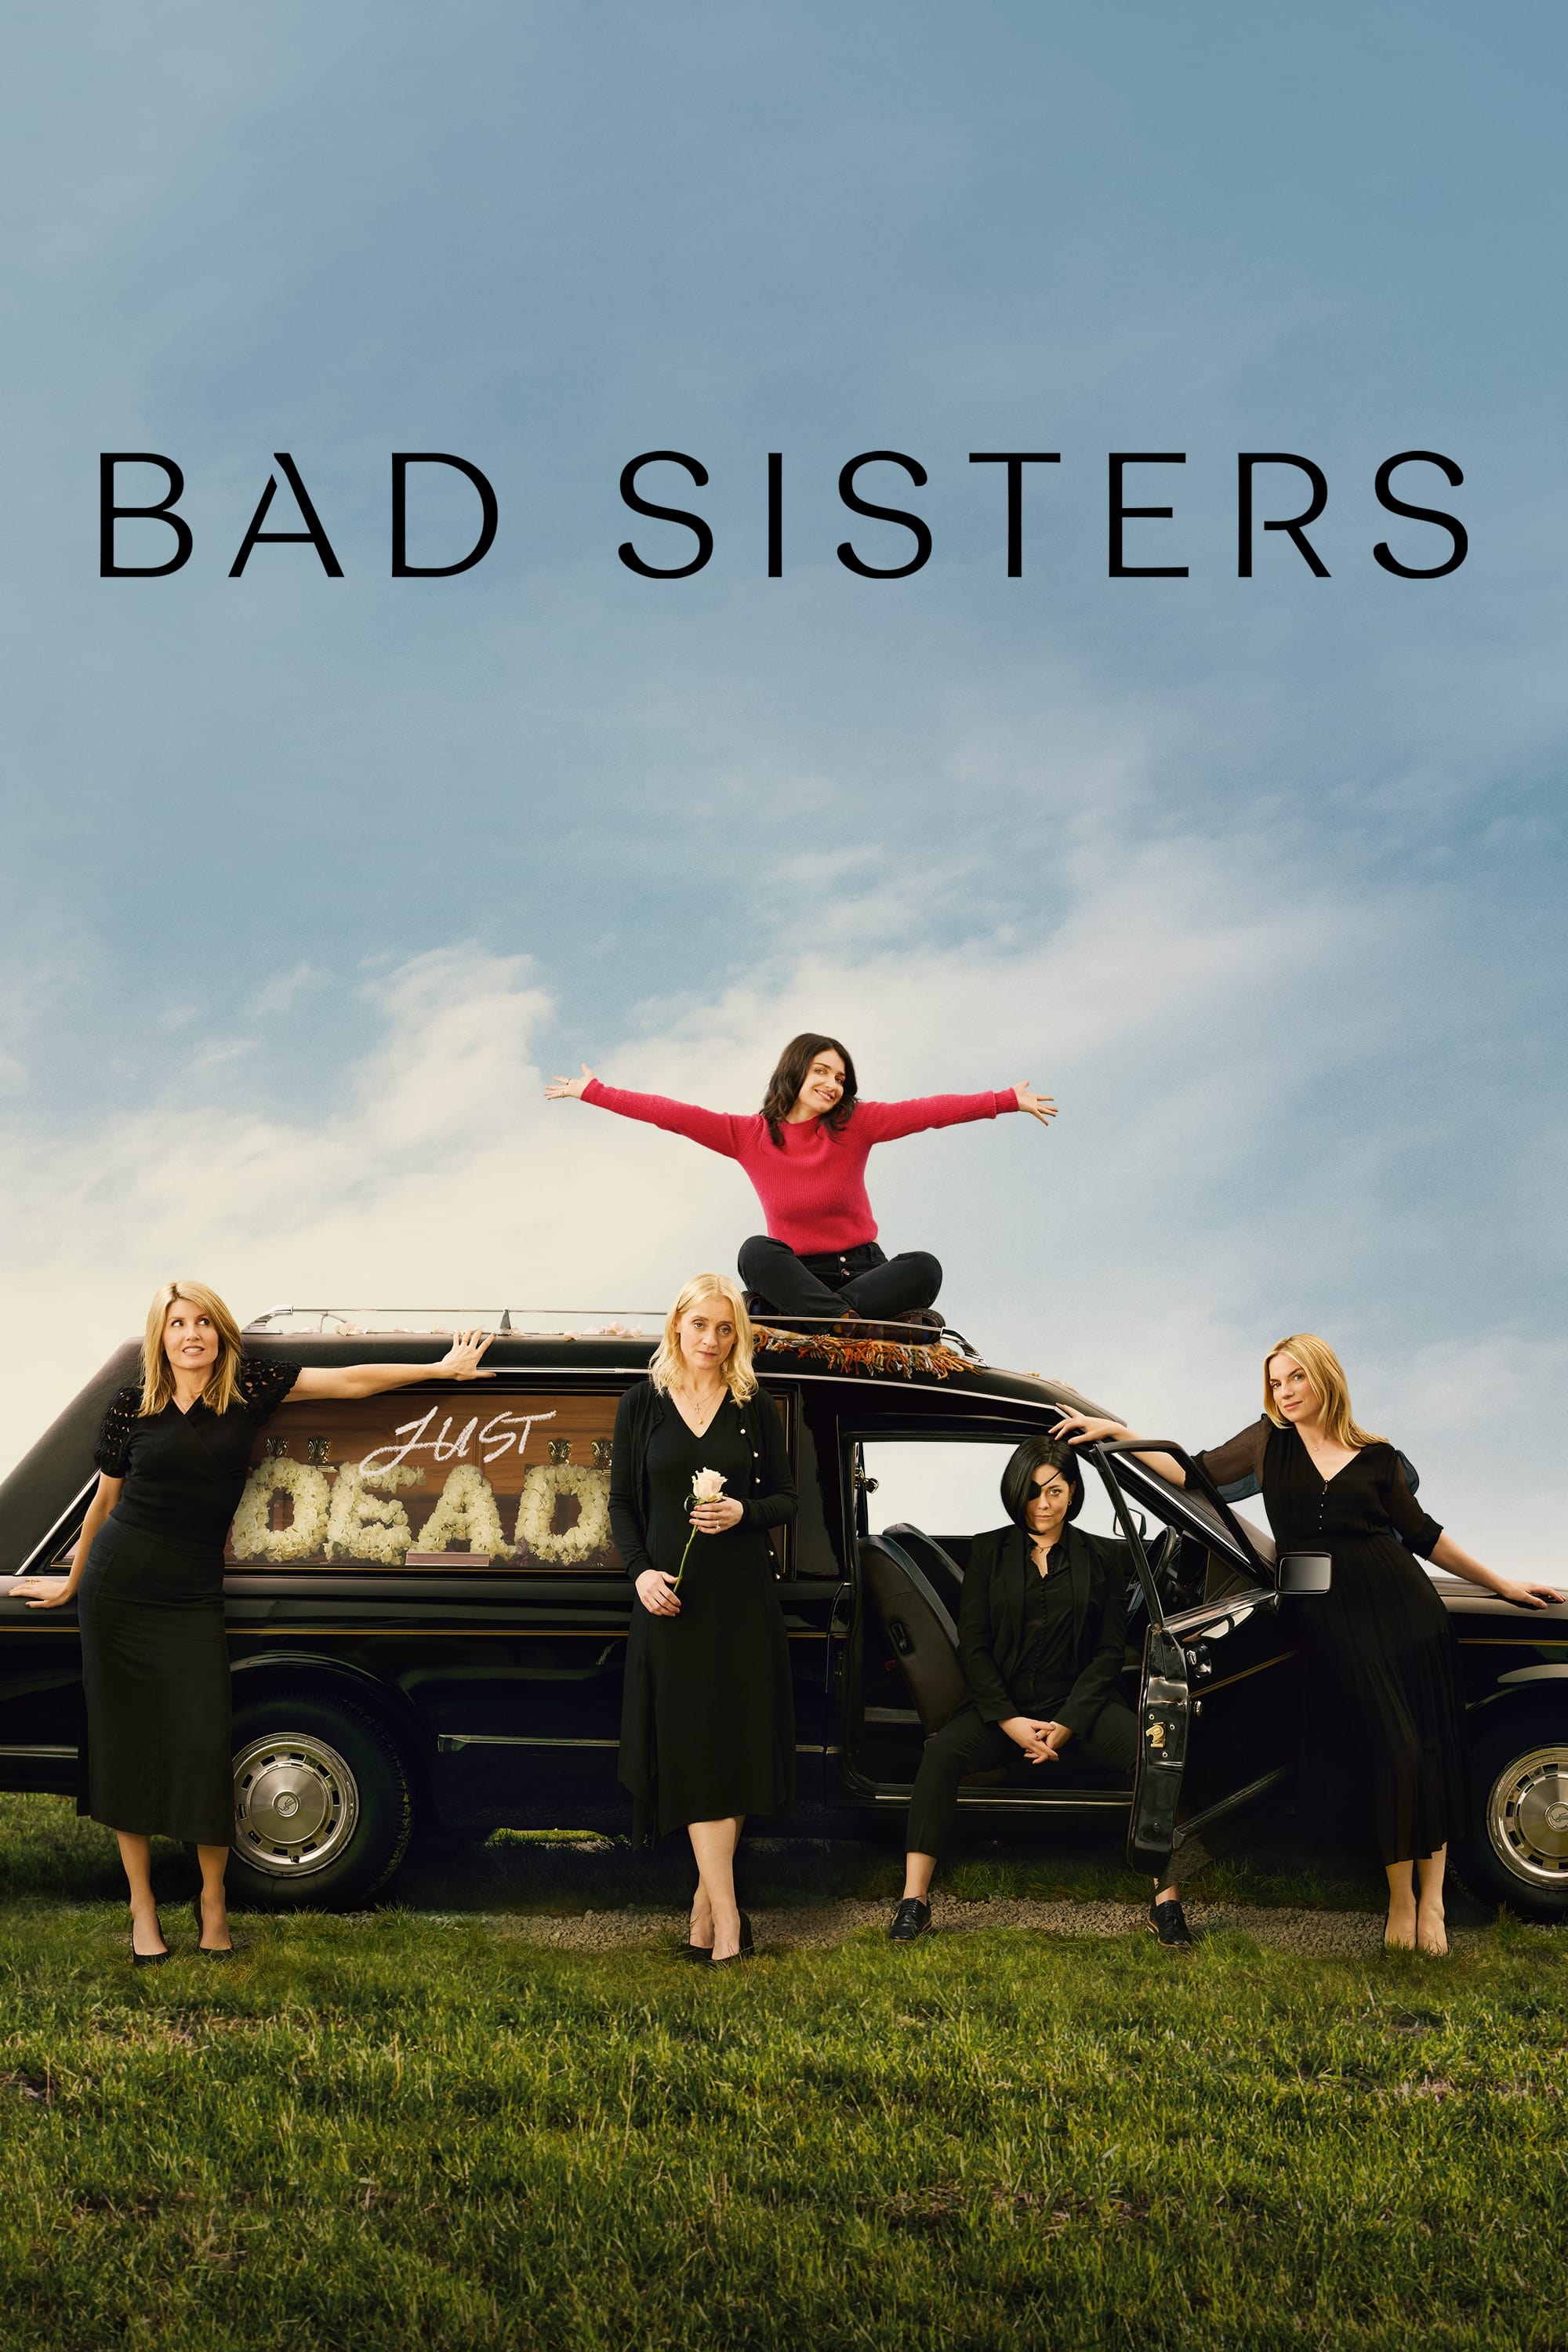 Bad Sisters TV Shows About Death